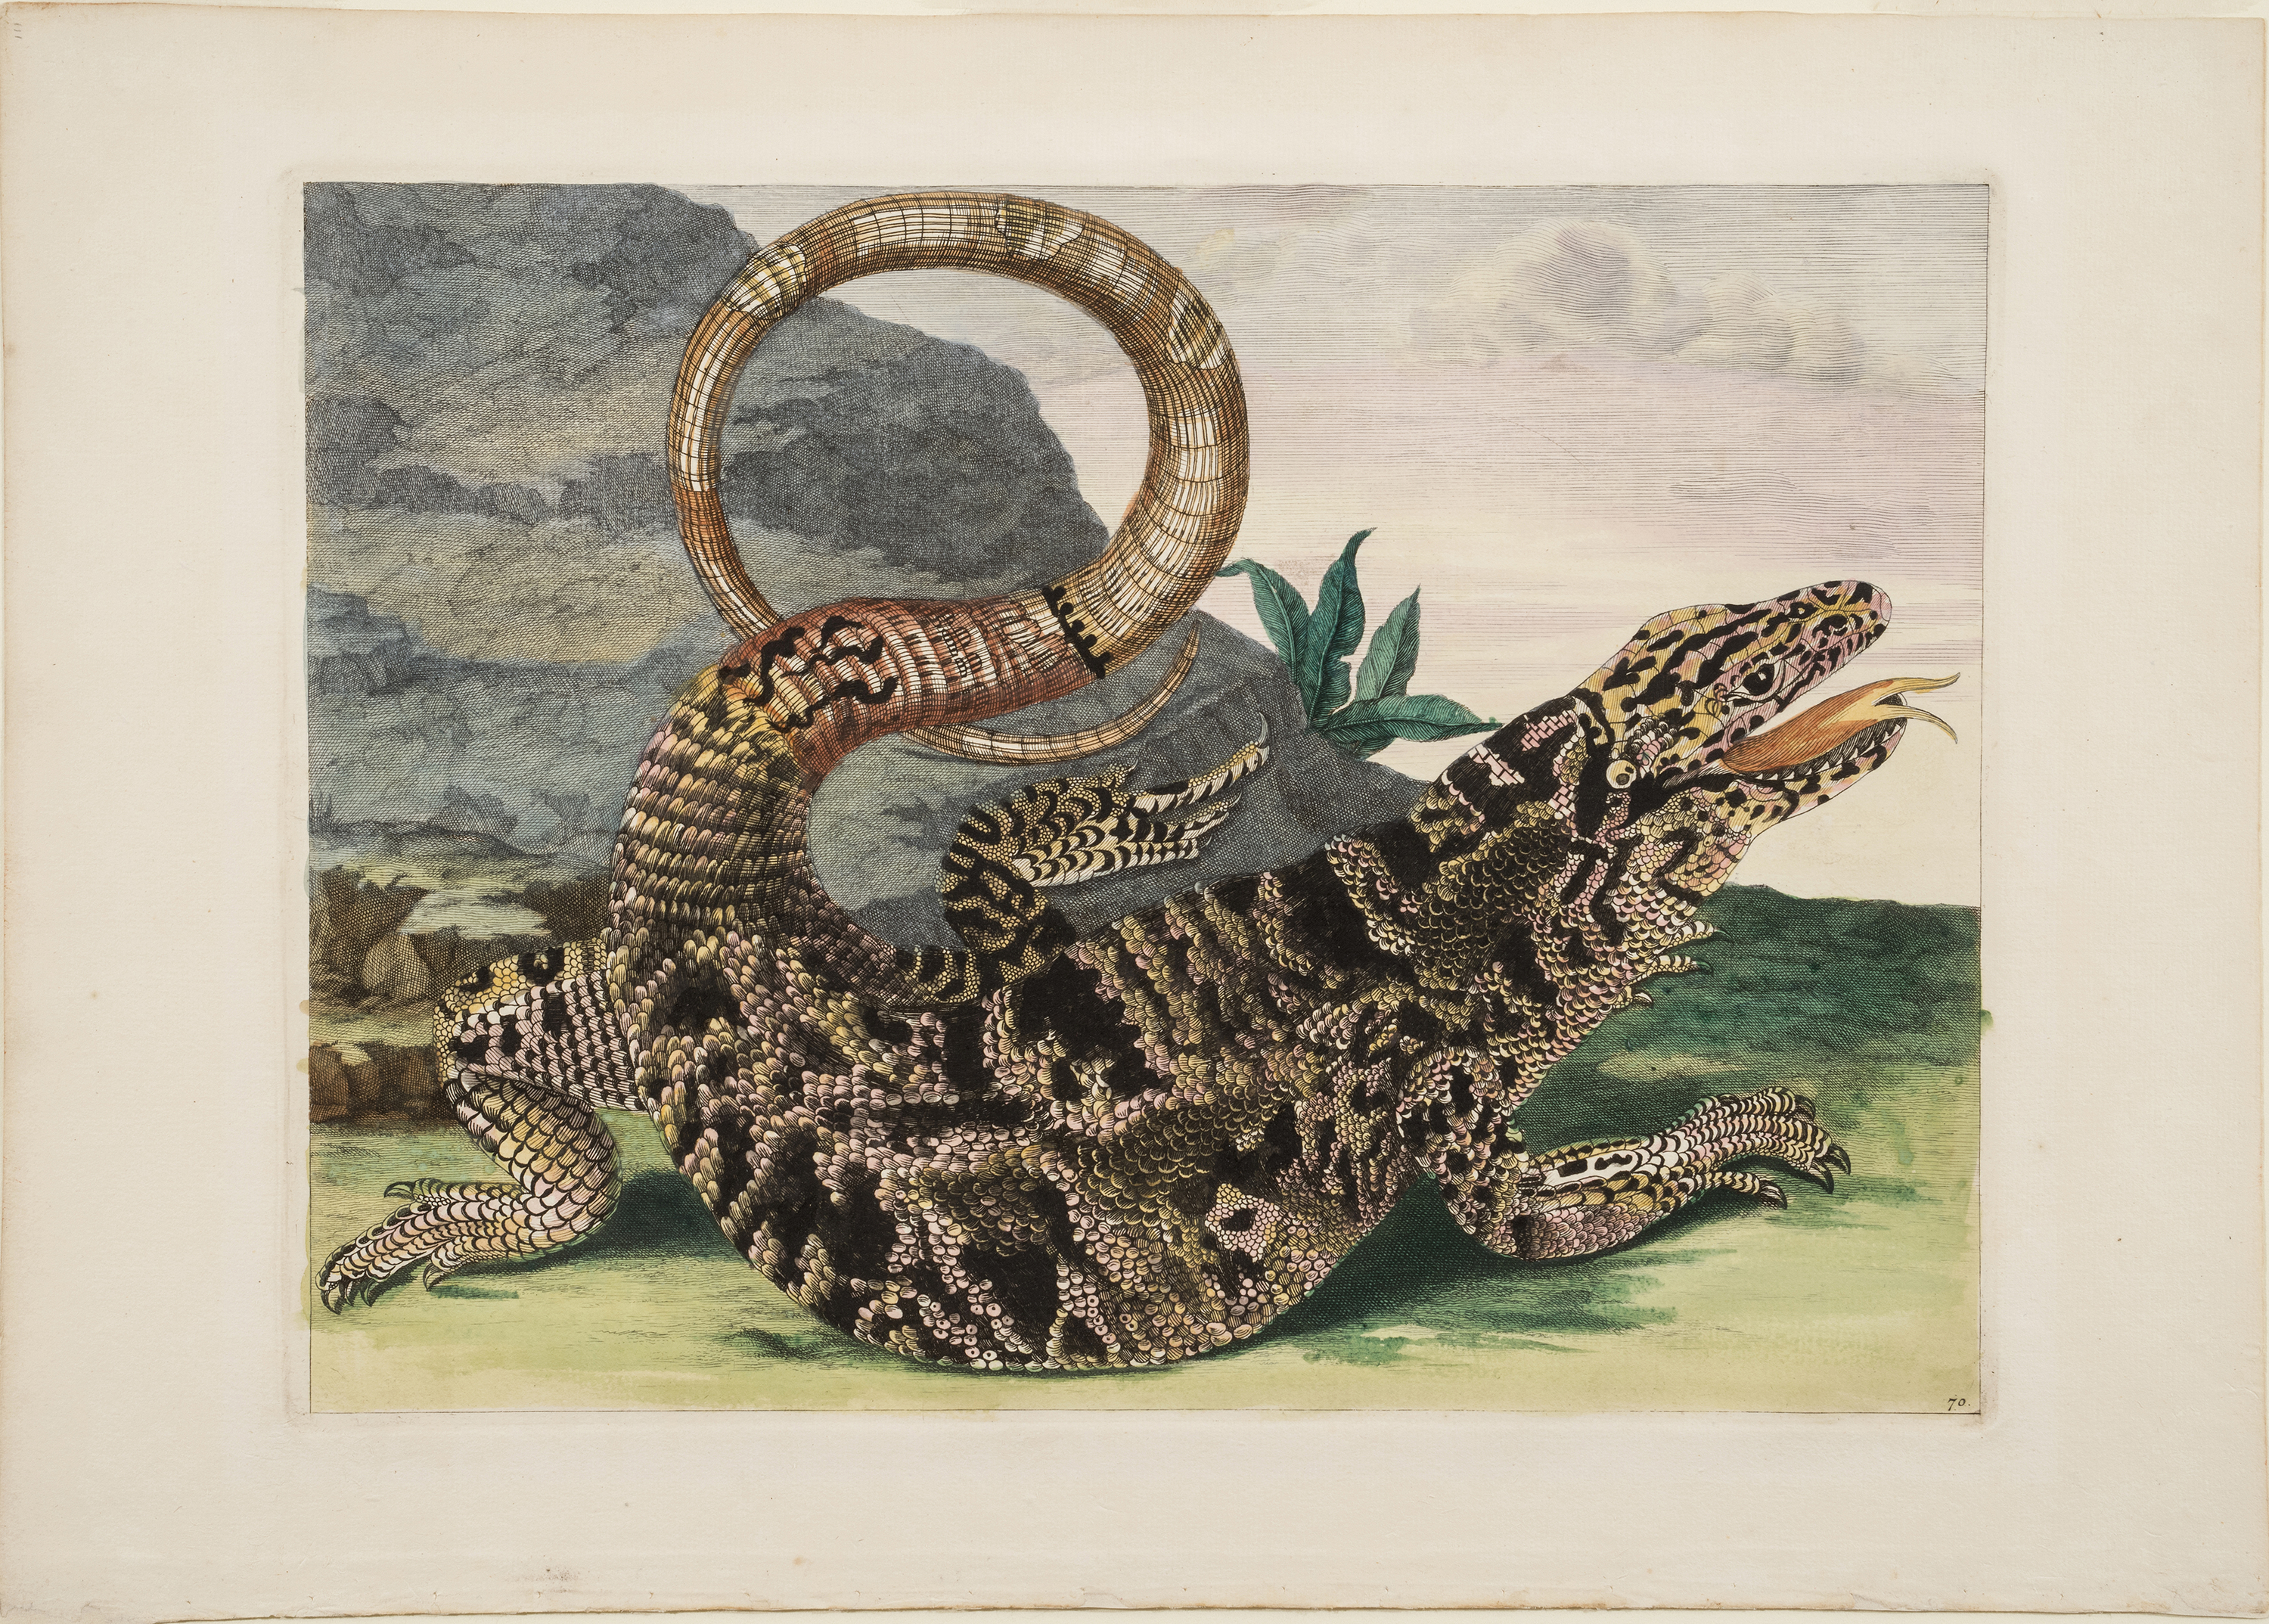 Plate 70 from Dissertation in Insect Generations and Metamorphosis in Surinam by Maria Sibylla Merian - 1719 - 16.125 x 11 in. National Museum of Women in the Arts